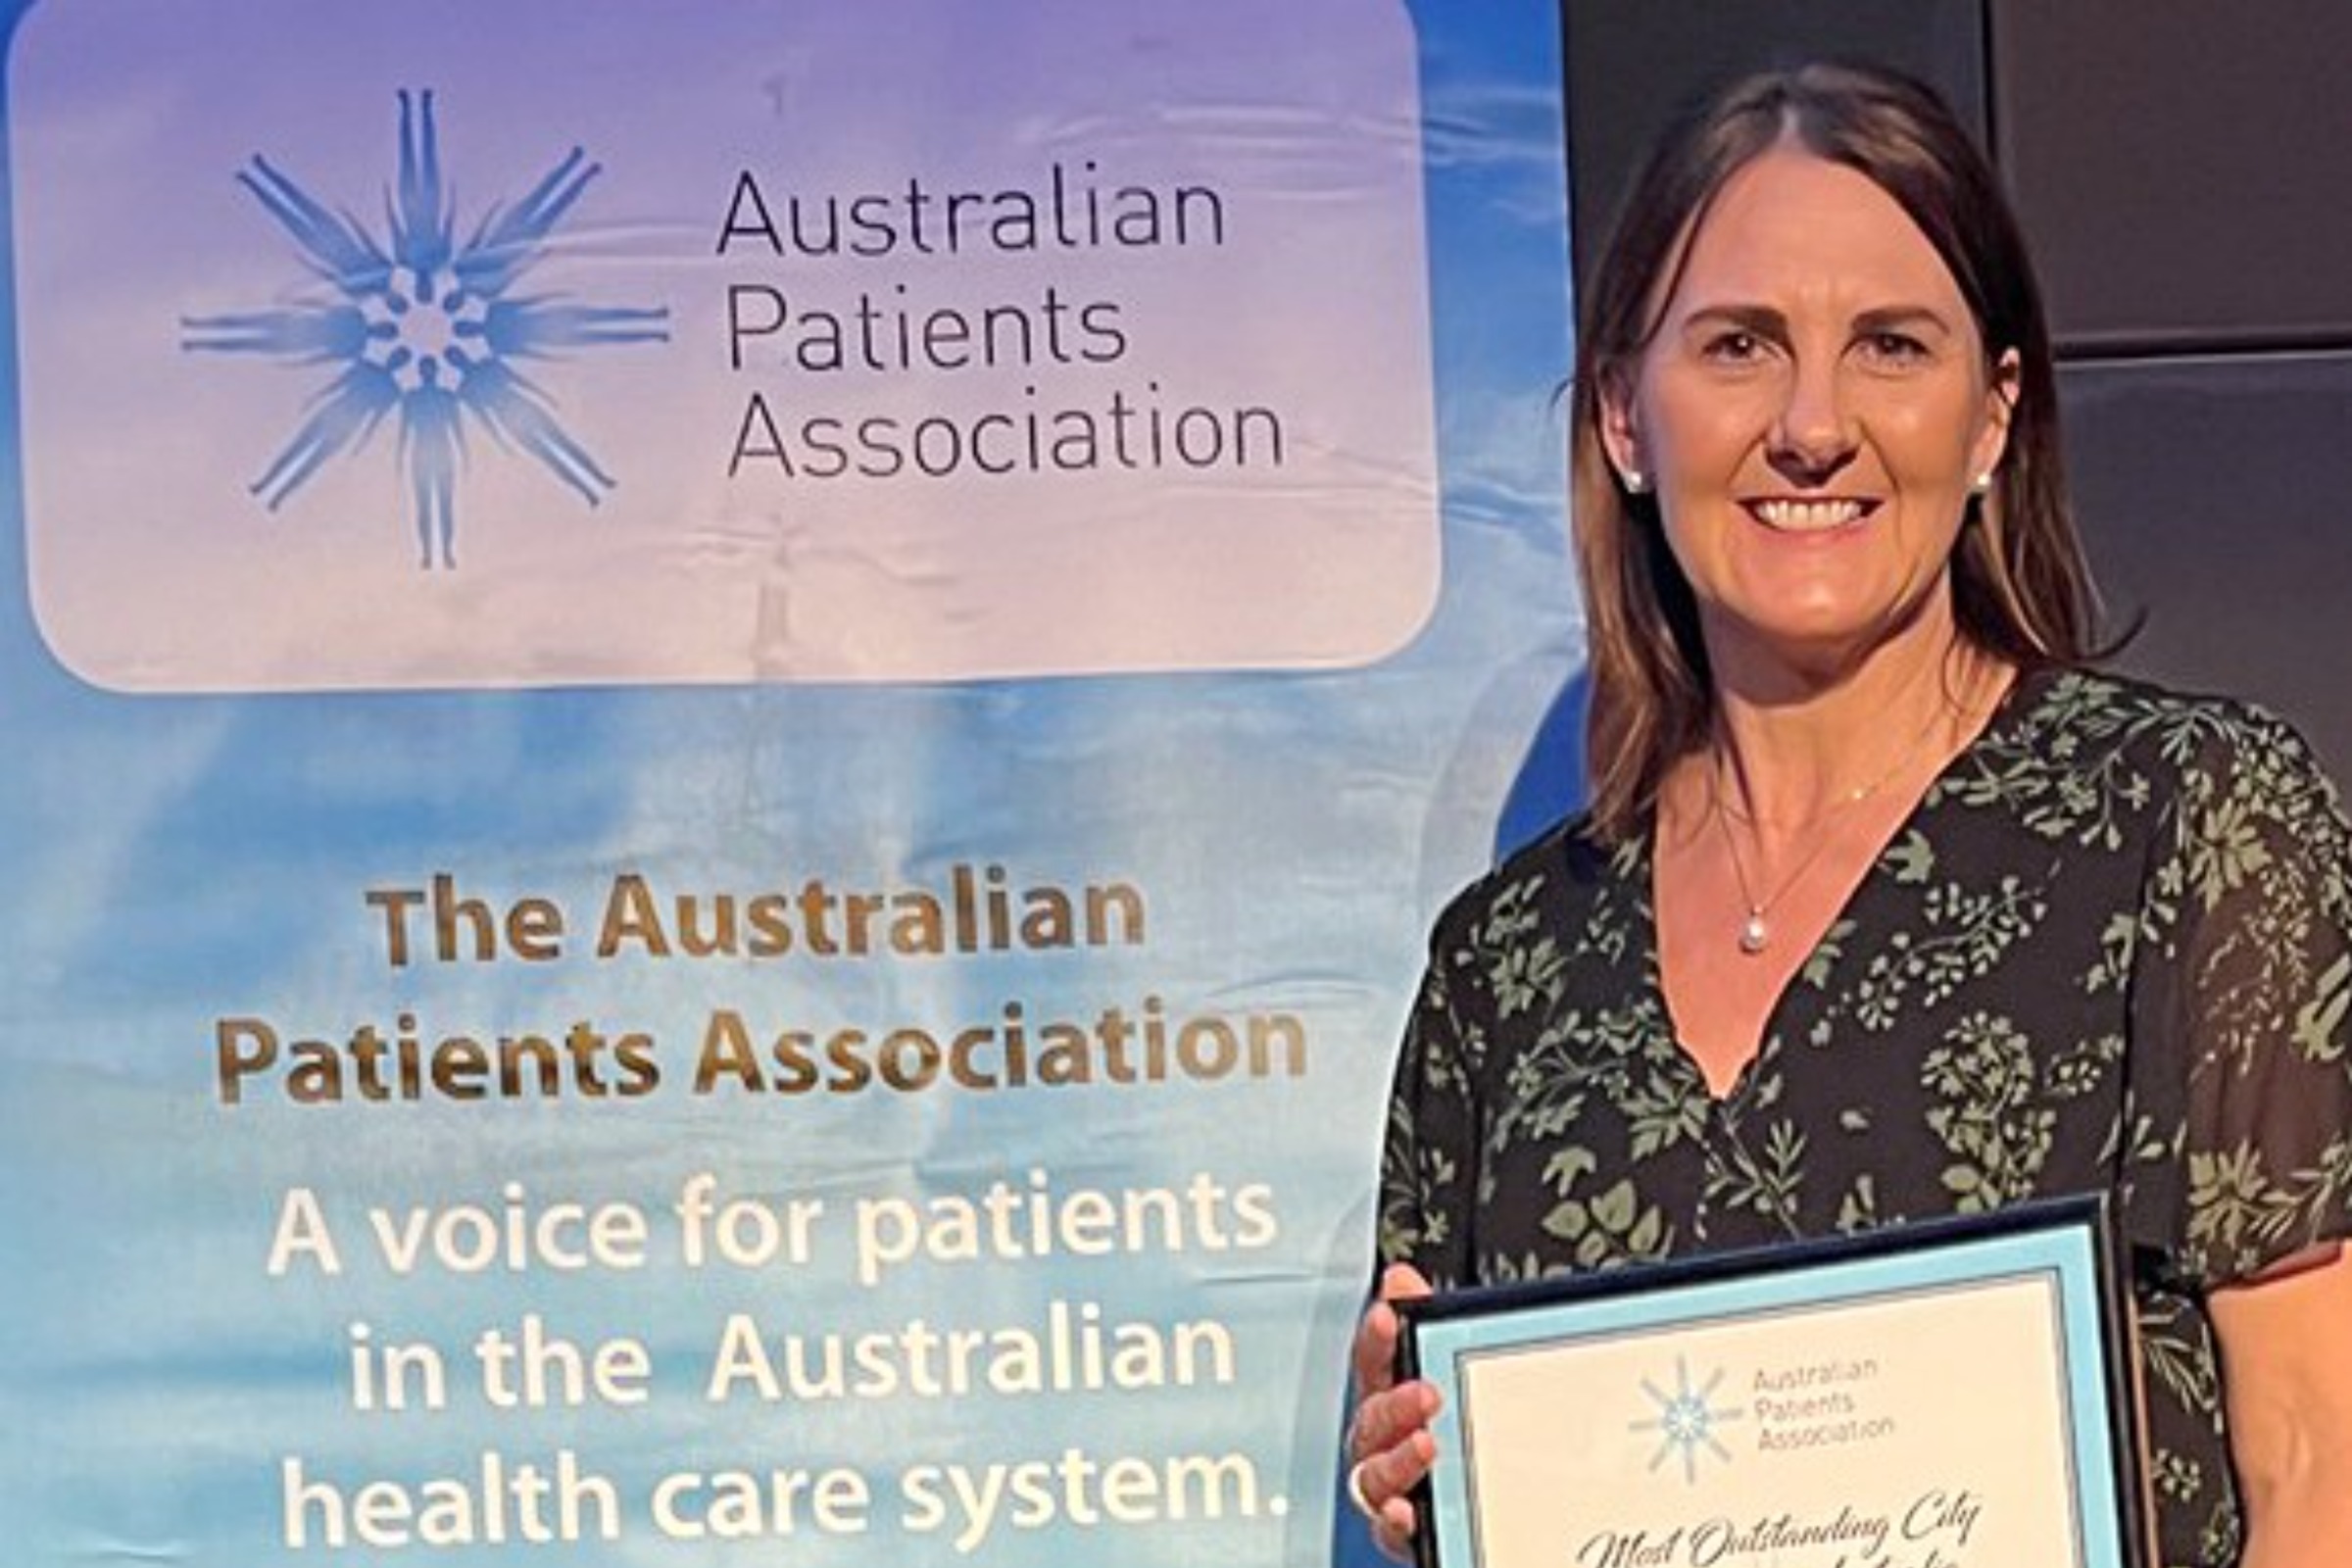 Joanne Newbury, Acting General Manager Sutherland Hospital with the award for Most Outstanding Metropolitan Hospital in Australia Award last week at the National Awards Night for the health sector, run by the Australian Patients Association